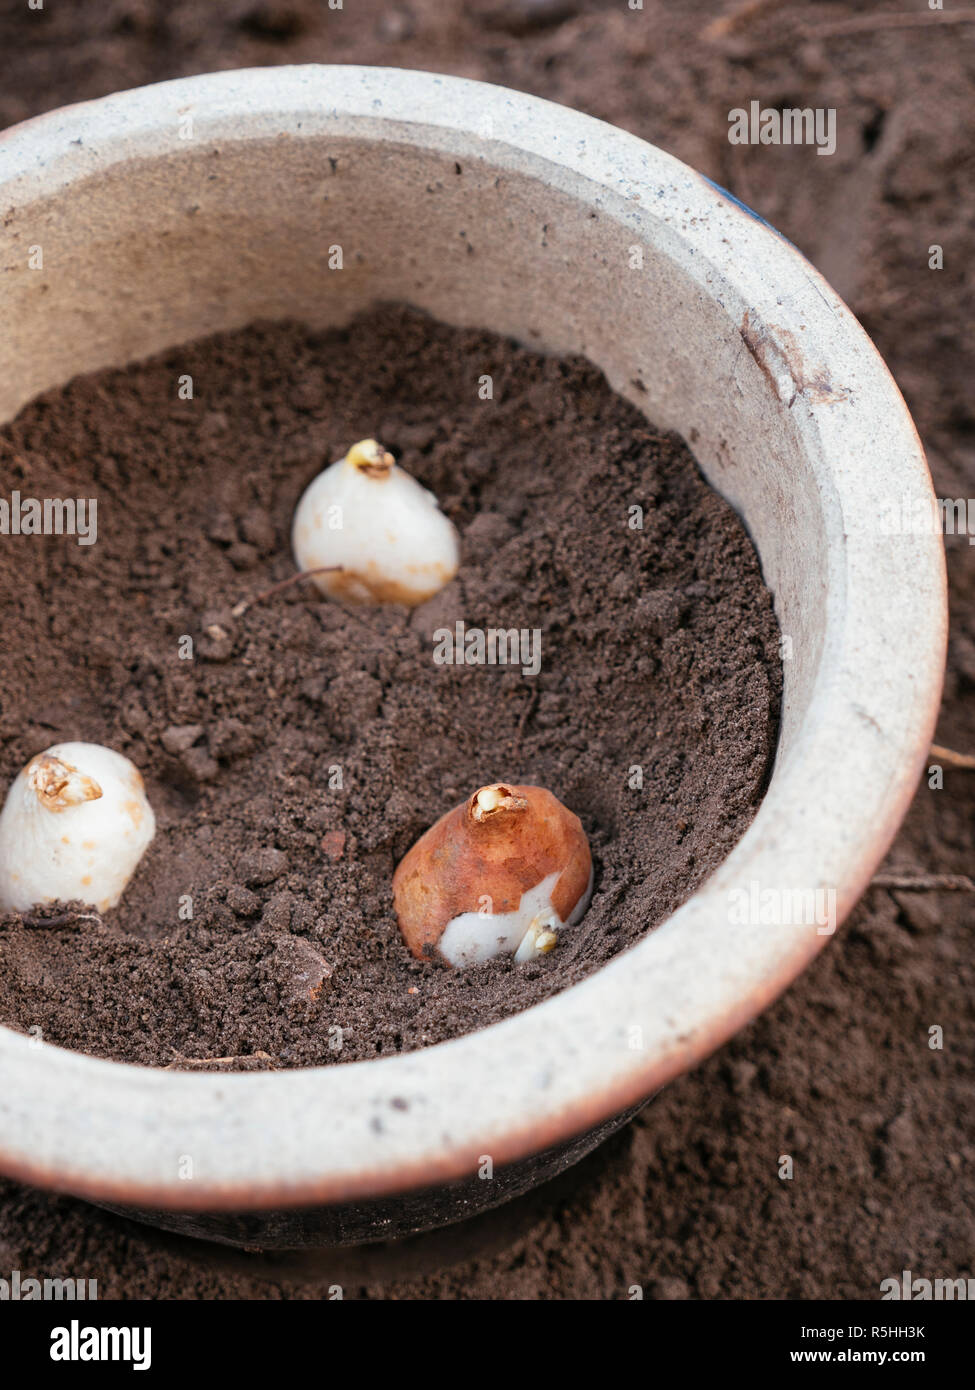 Tulip bulbs being planted in a glazed terracotta pot. Stock Photo